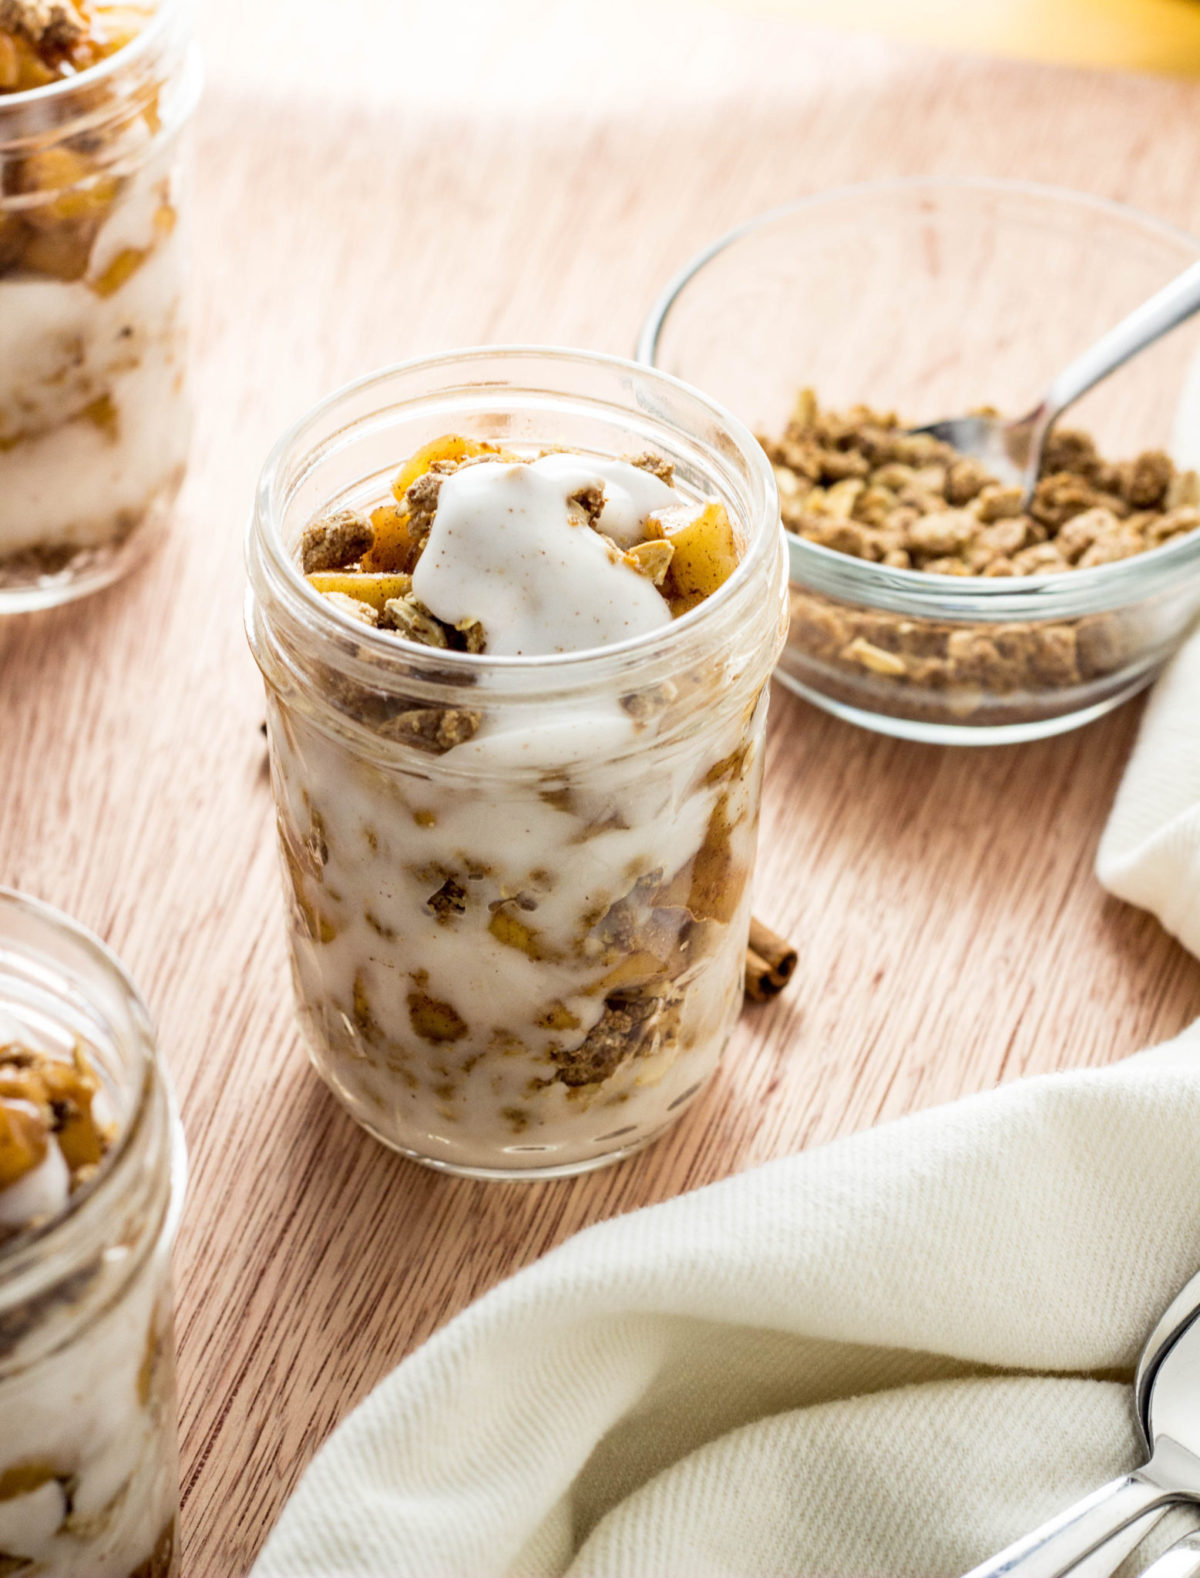 A 45 degree angle top view of Vegan Sautéed Apple Yogurt Parfait in a clear jar. There are other jars partially visible and a bowl of granola n the background 